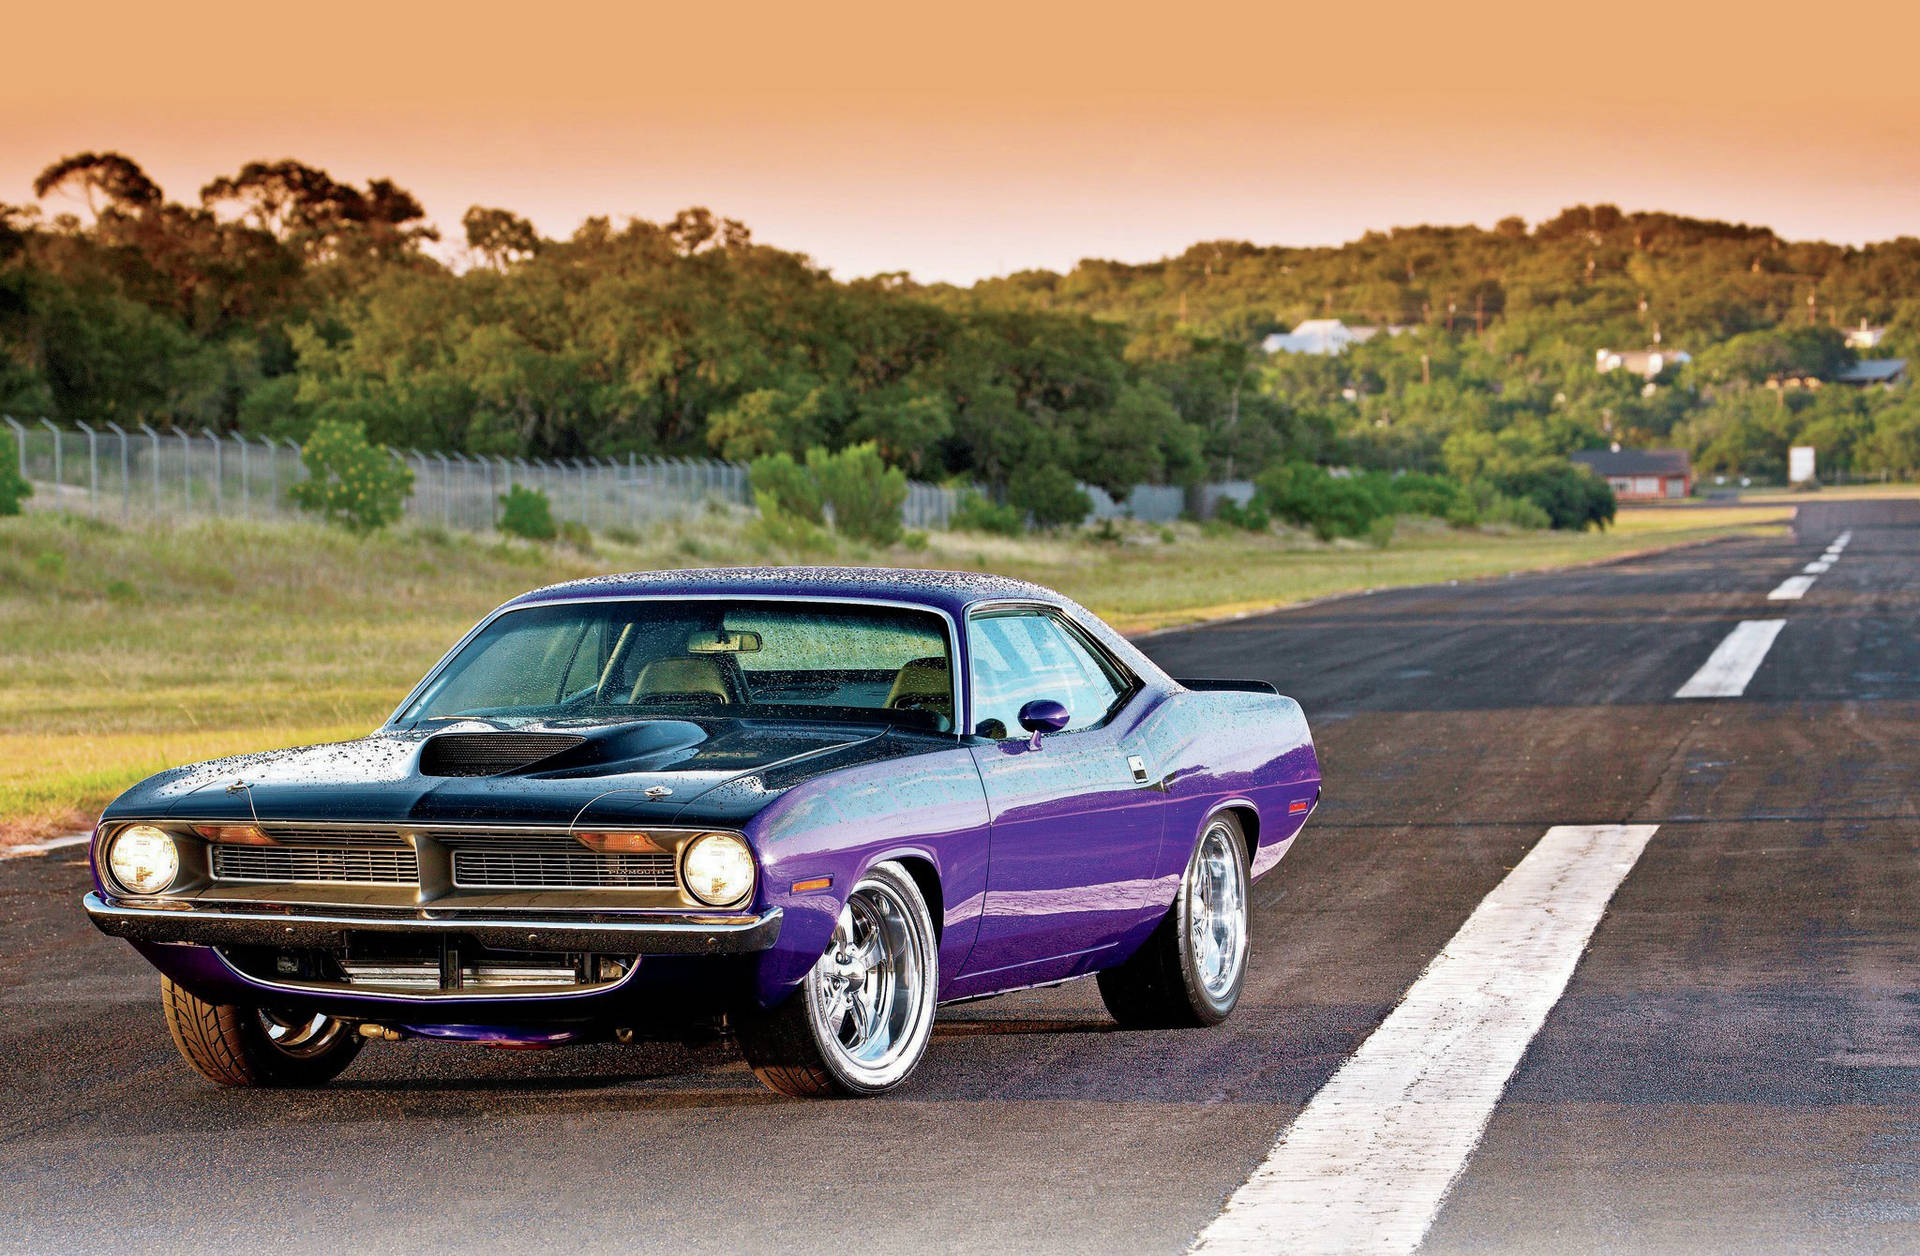 Violet Plymouth Barracuda On The Road Background